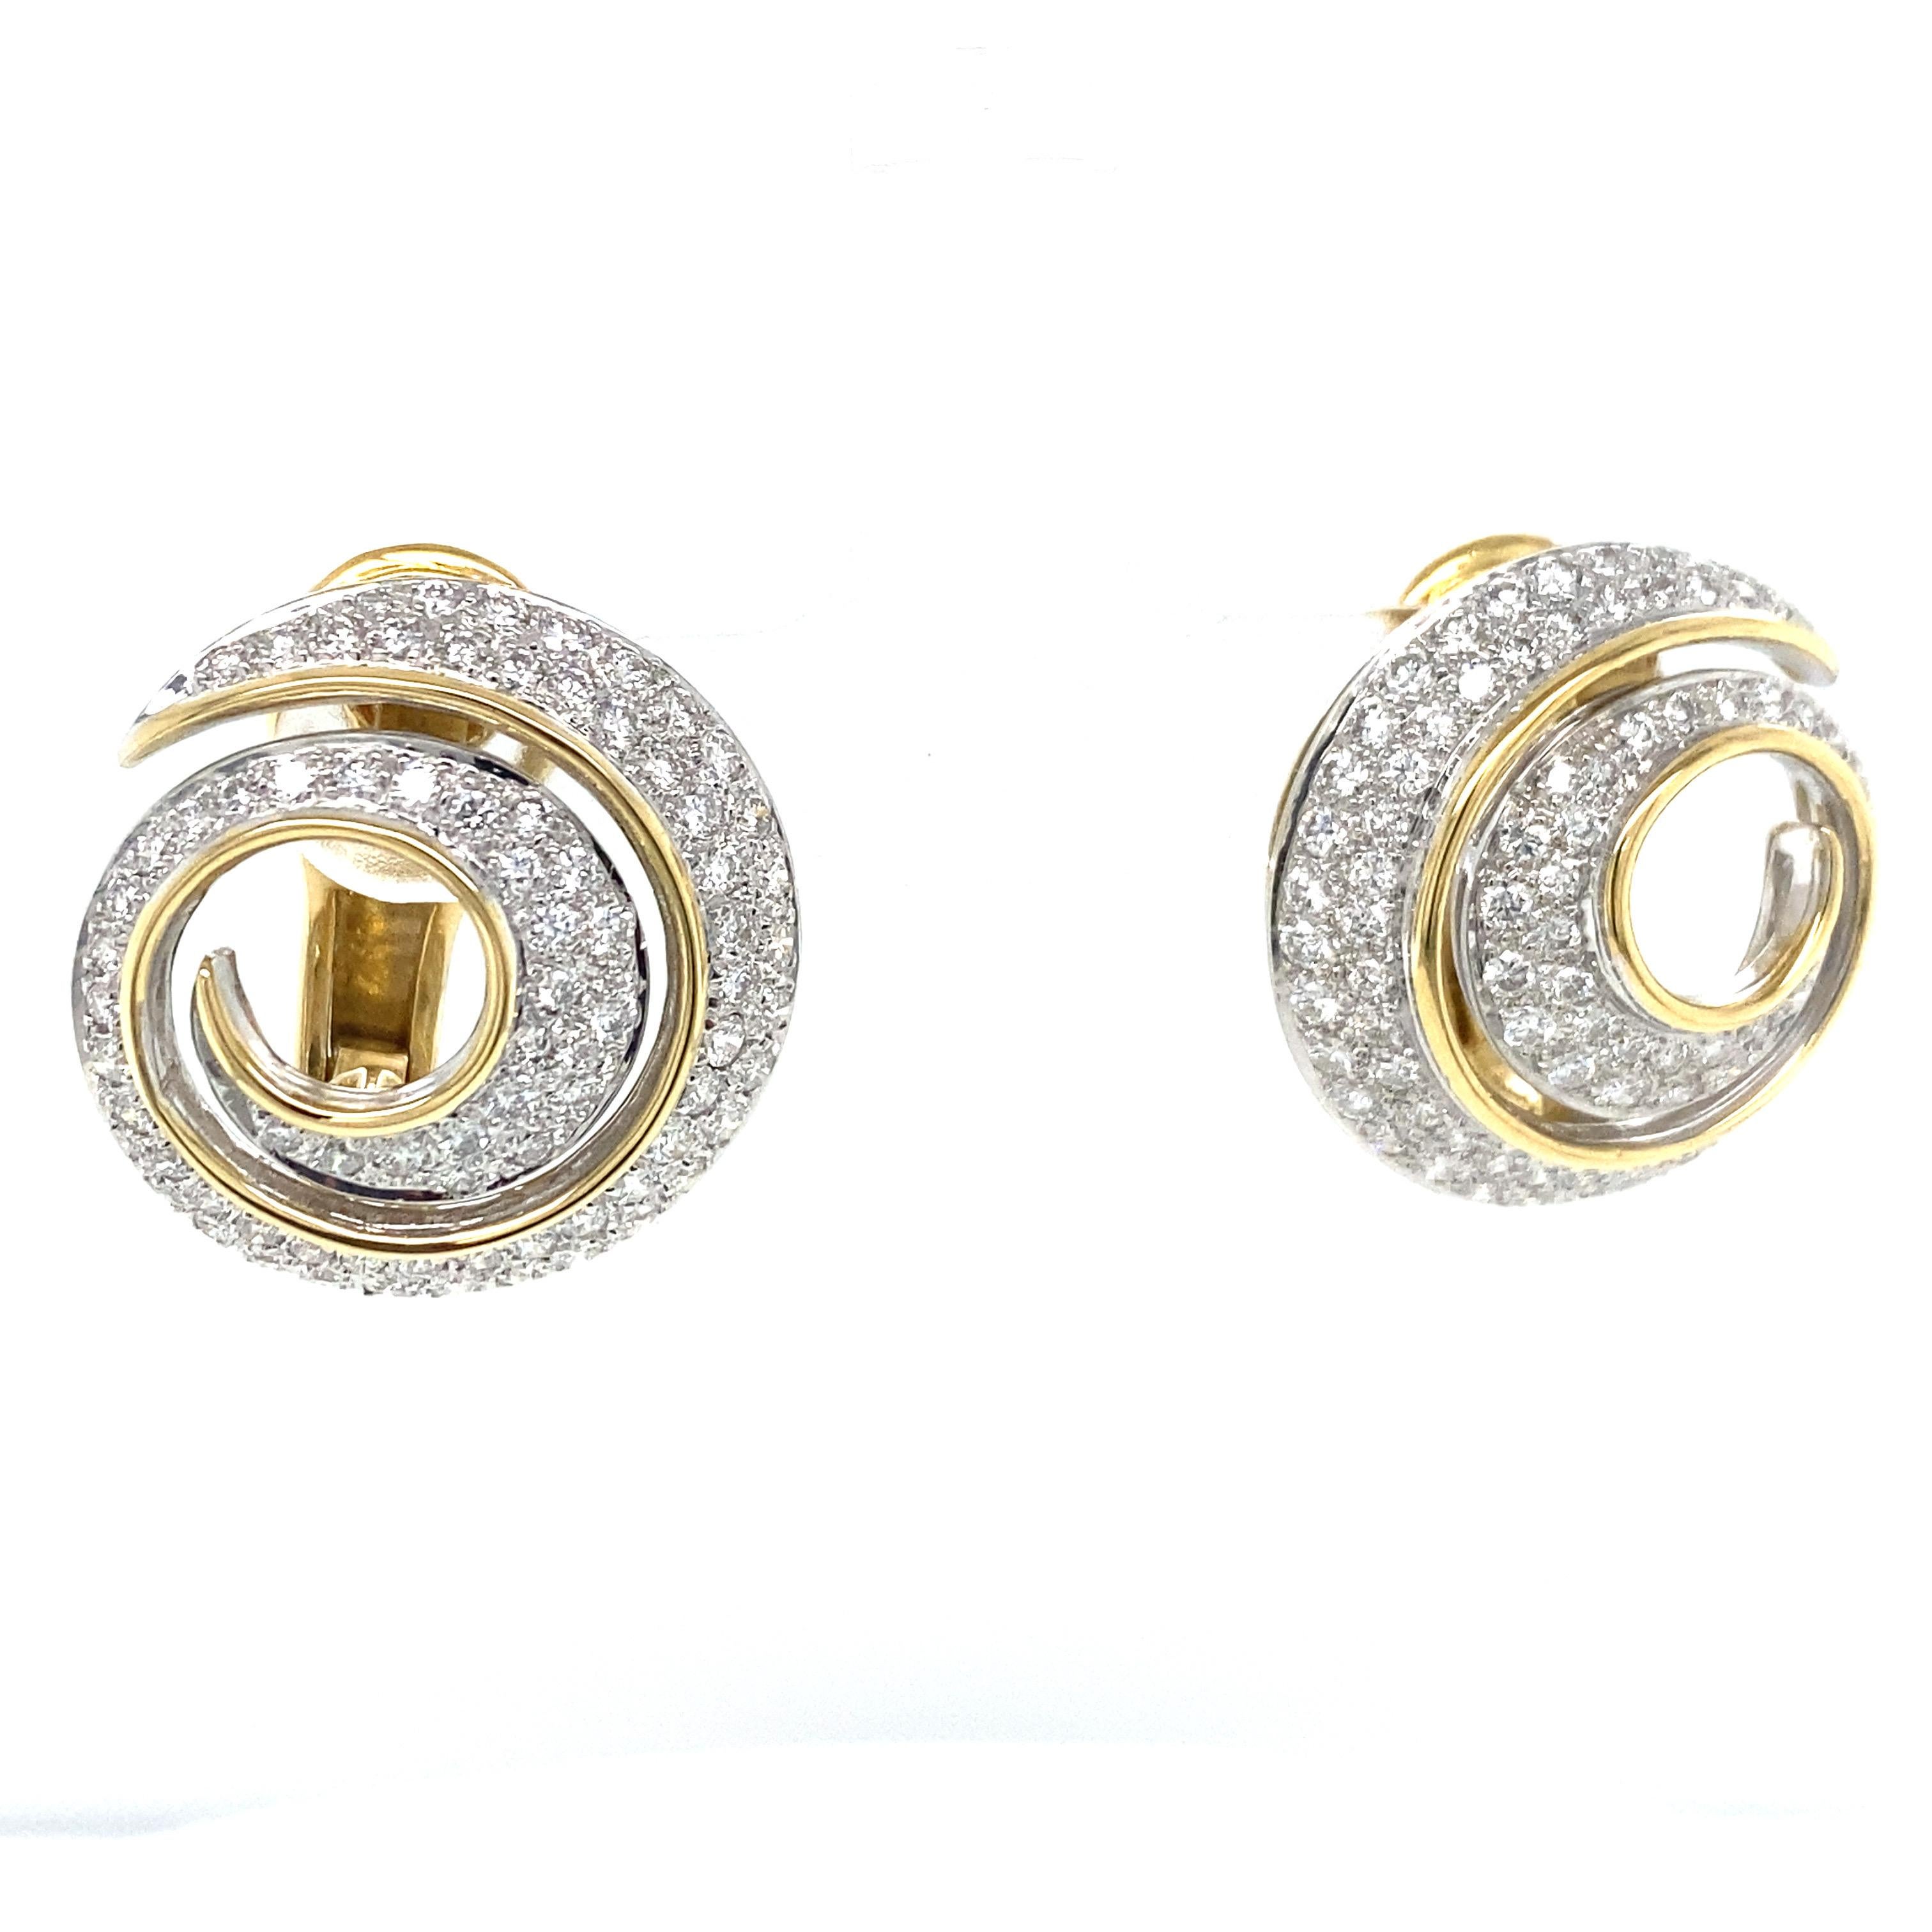 Handmade Diamond Swirl Button Earrings in 18K Yellow Gold and Platinum.  156 Round Brilliant Cut Diamonds weighing 2.03 carat total weight, G-H in color and VS in clarity are expertly set.  The Earrings measure 7/8 inch in diameter. Lever-back